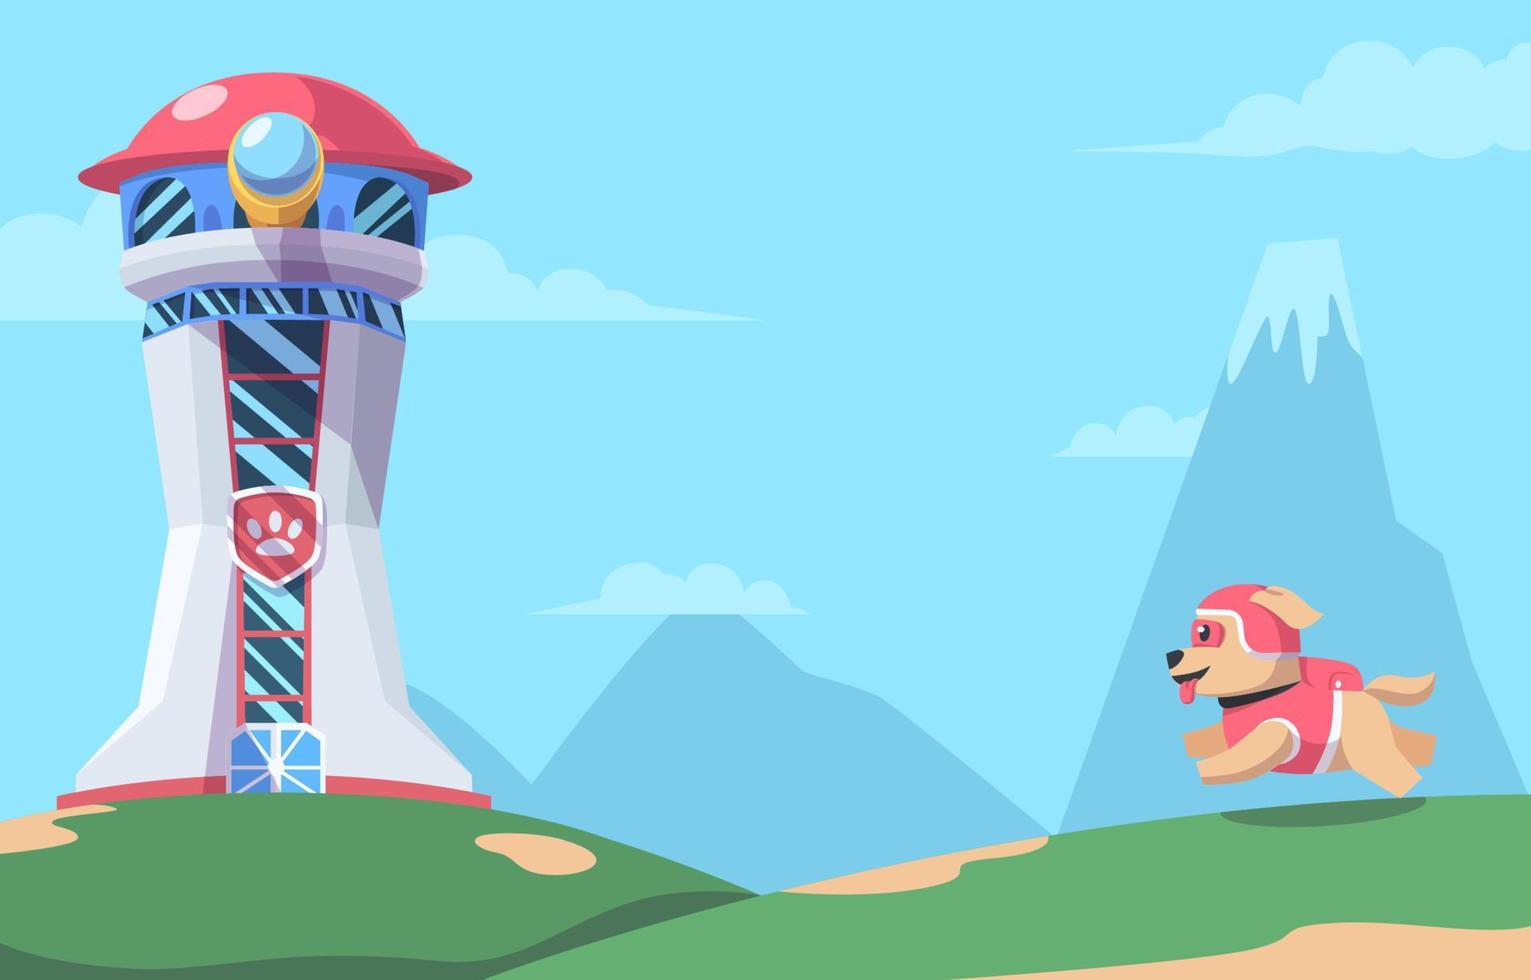 Paw Patrol with Tower Background vector